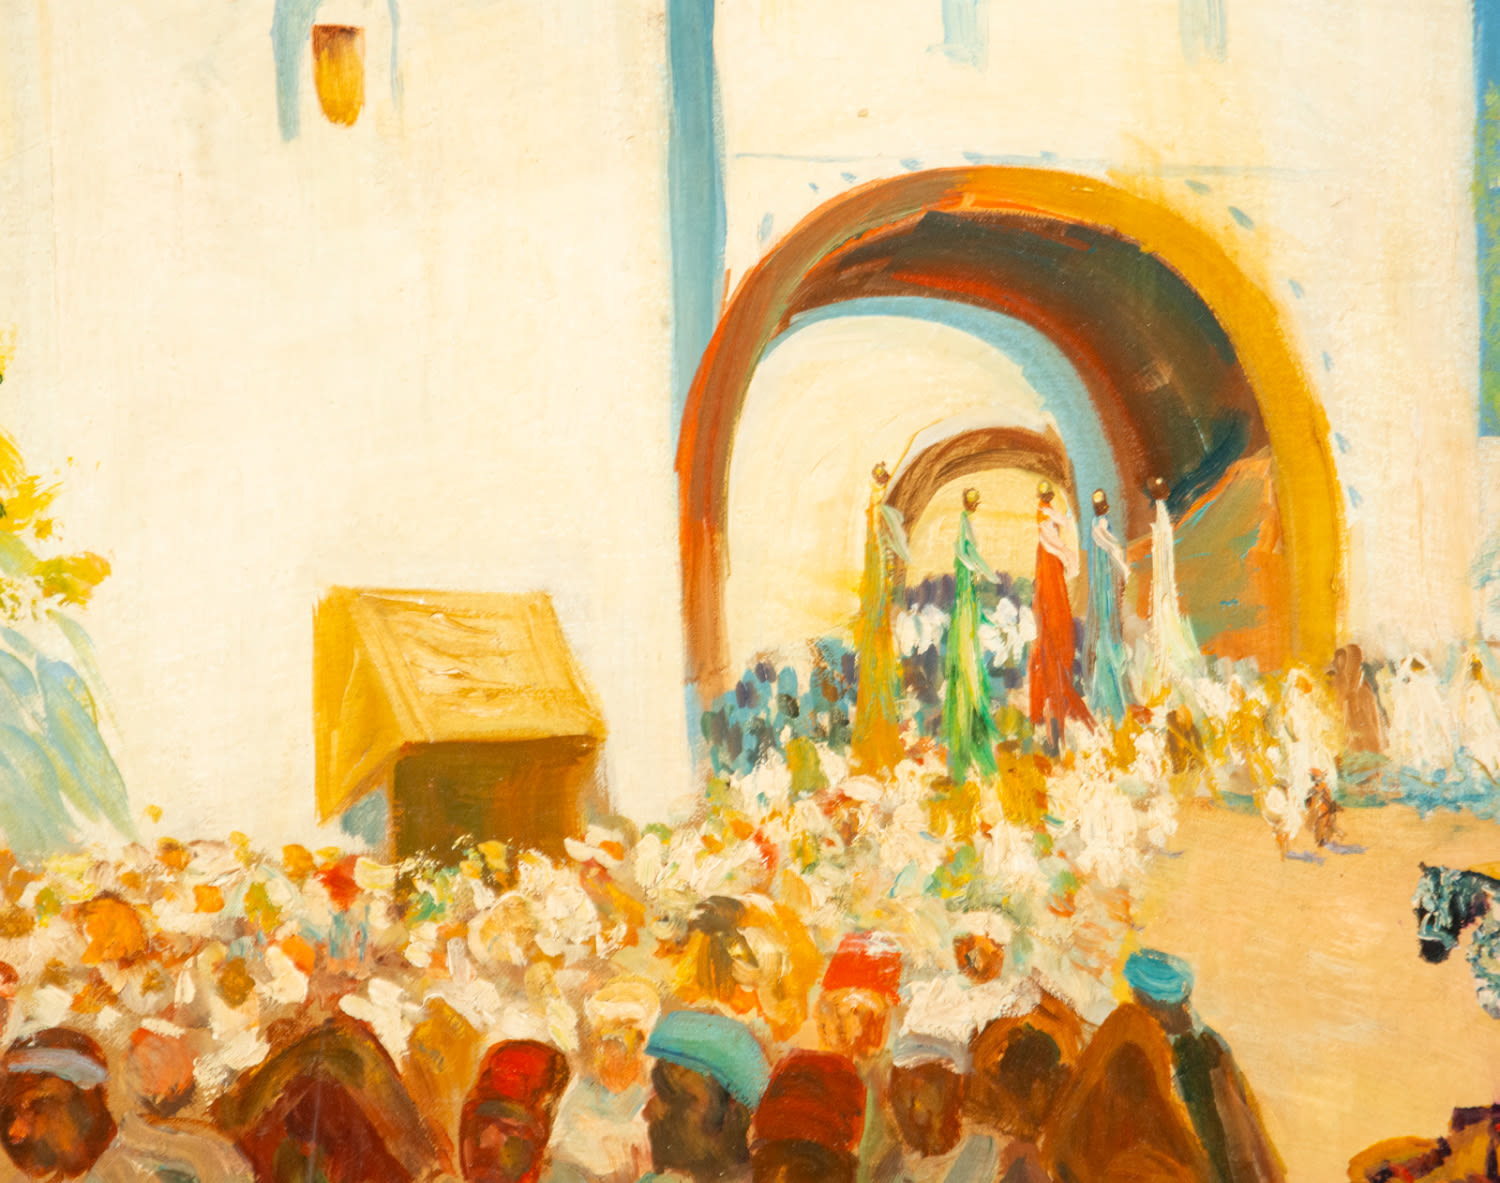 View of Characters in Orientalist Souk, signed, Spanish school of the 19th century - early 20th cent - Image 4 of 6